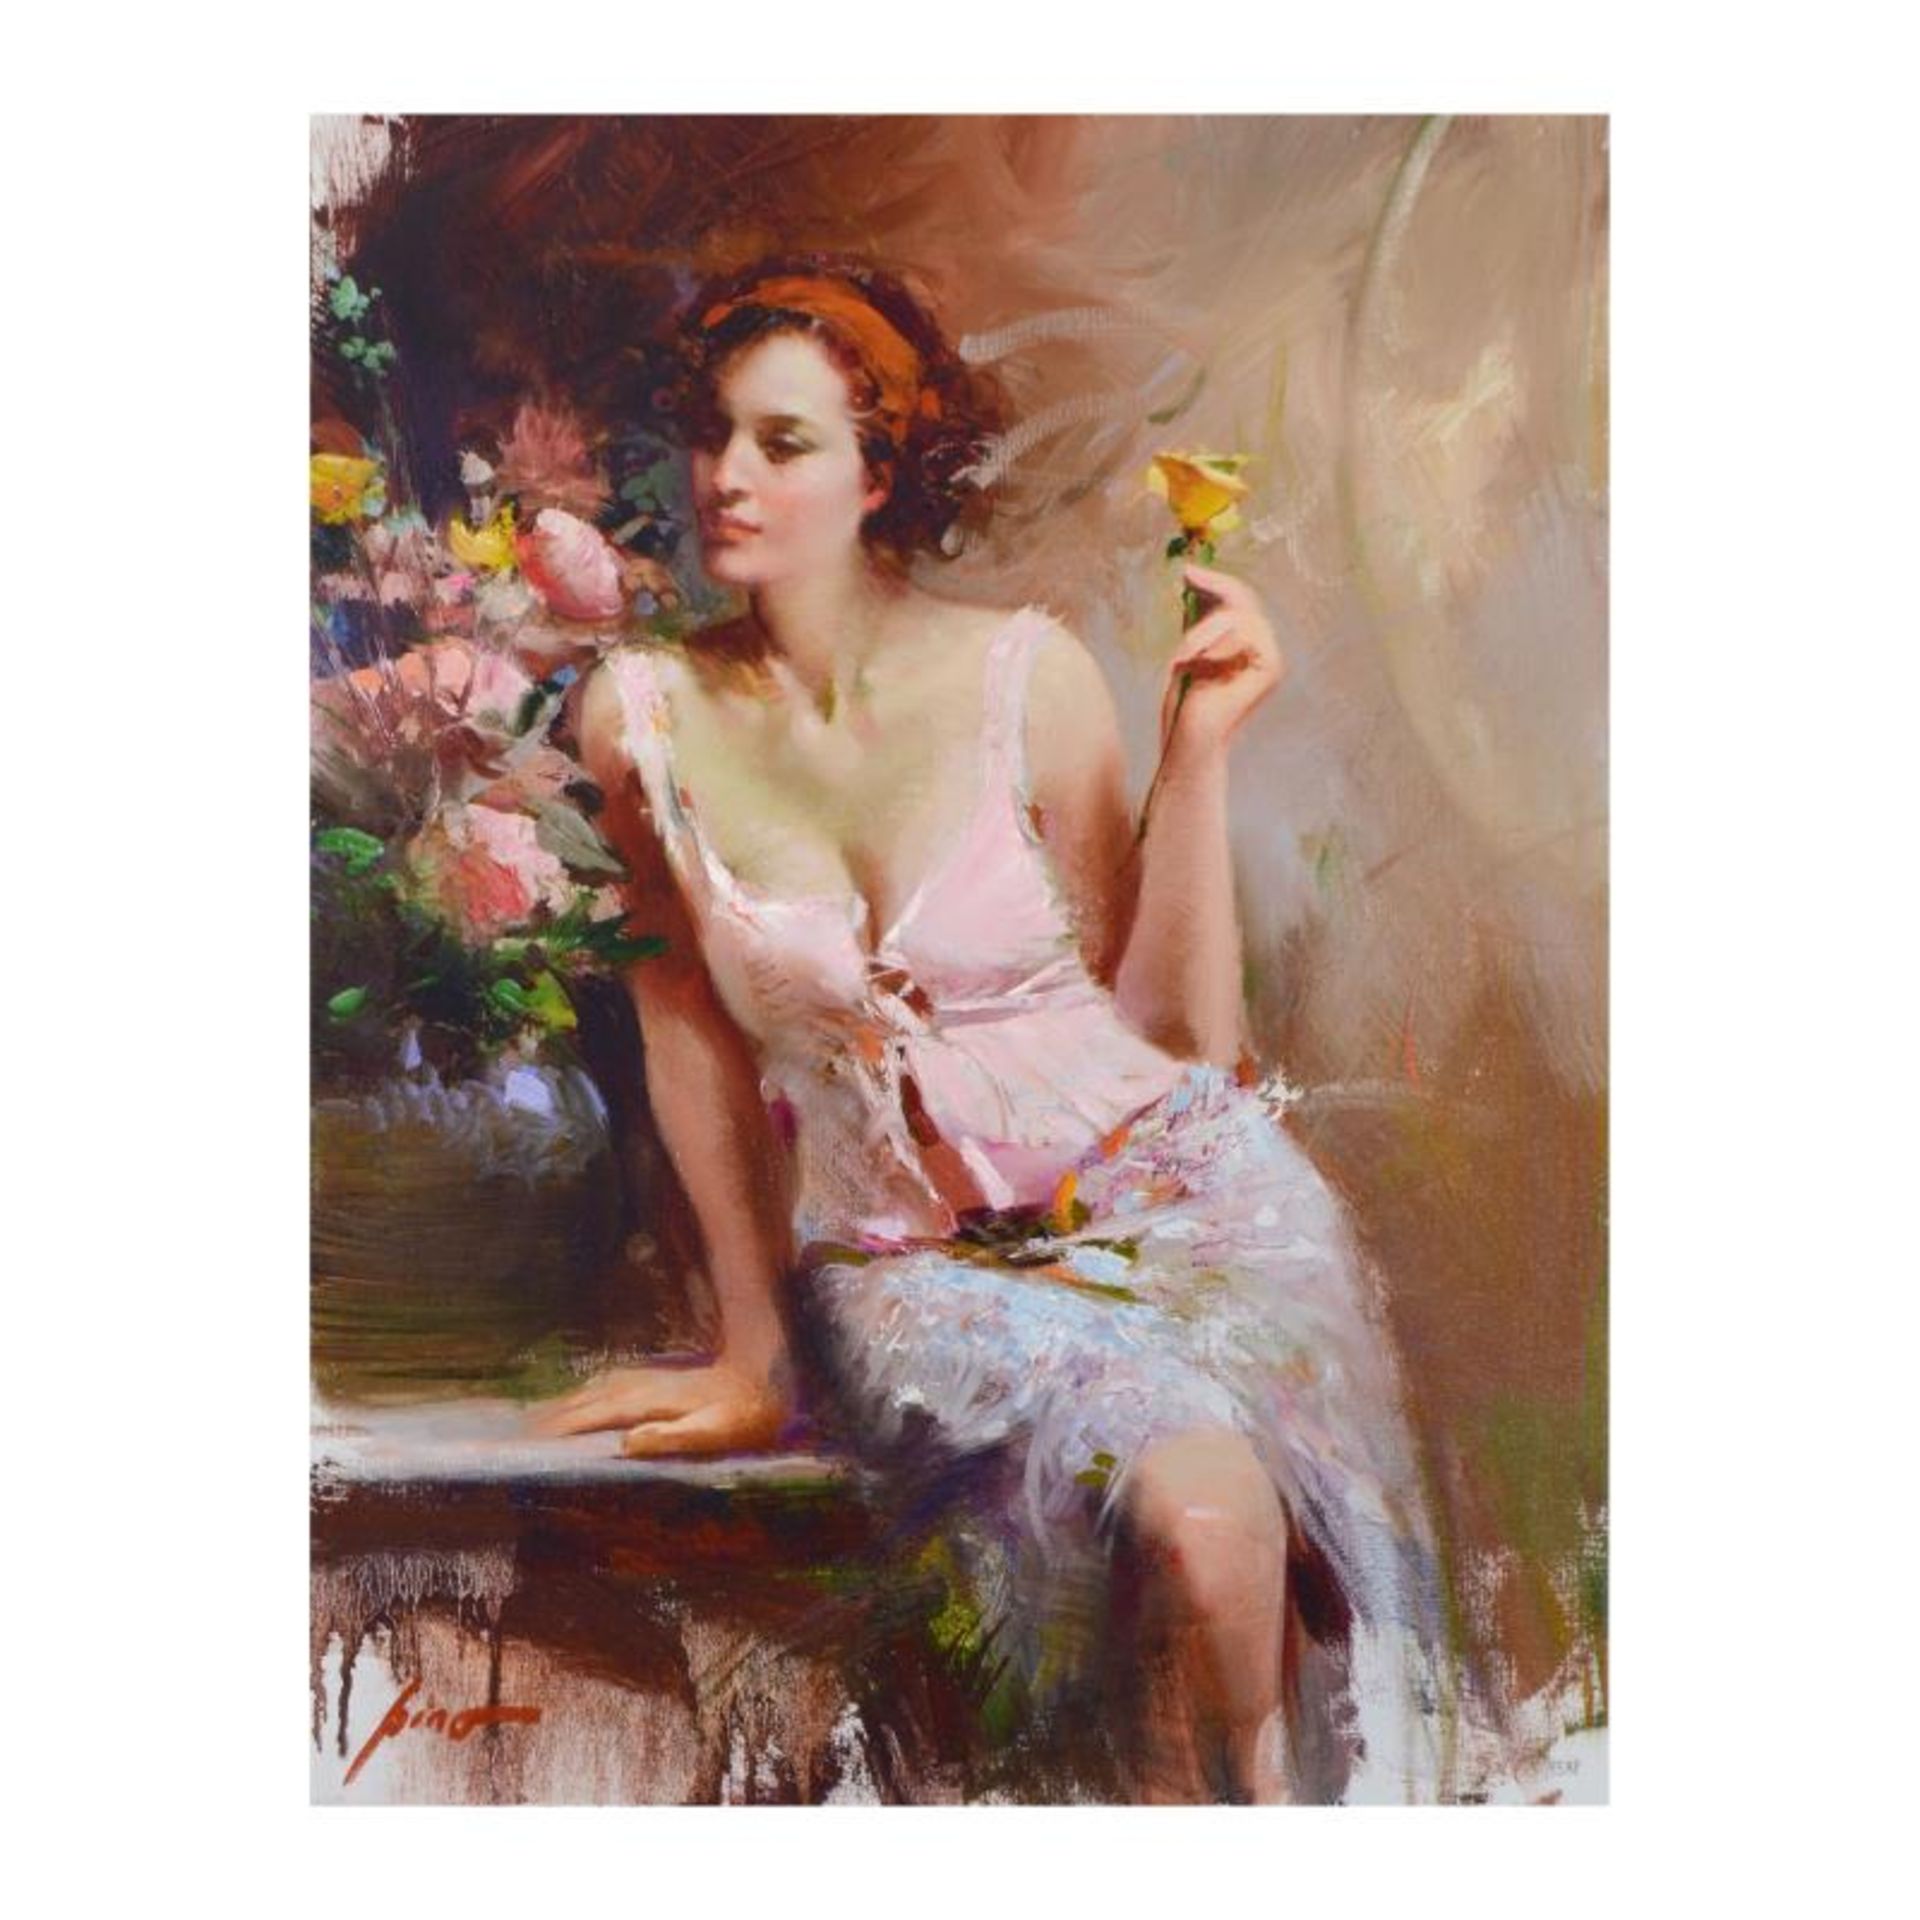 Pino (1939-2010), "Sweet Scent" Limited Edition Artist-Embellished Giclee on Can